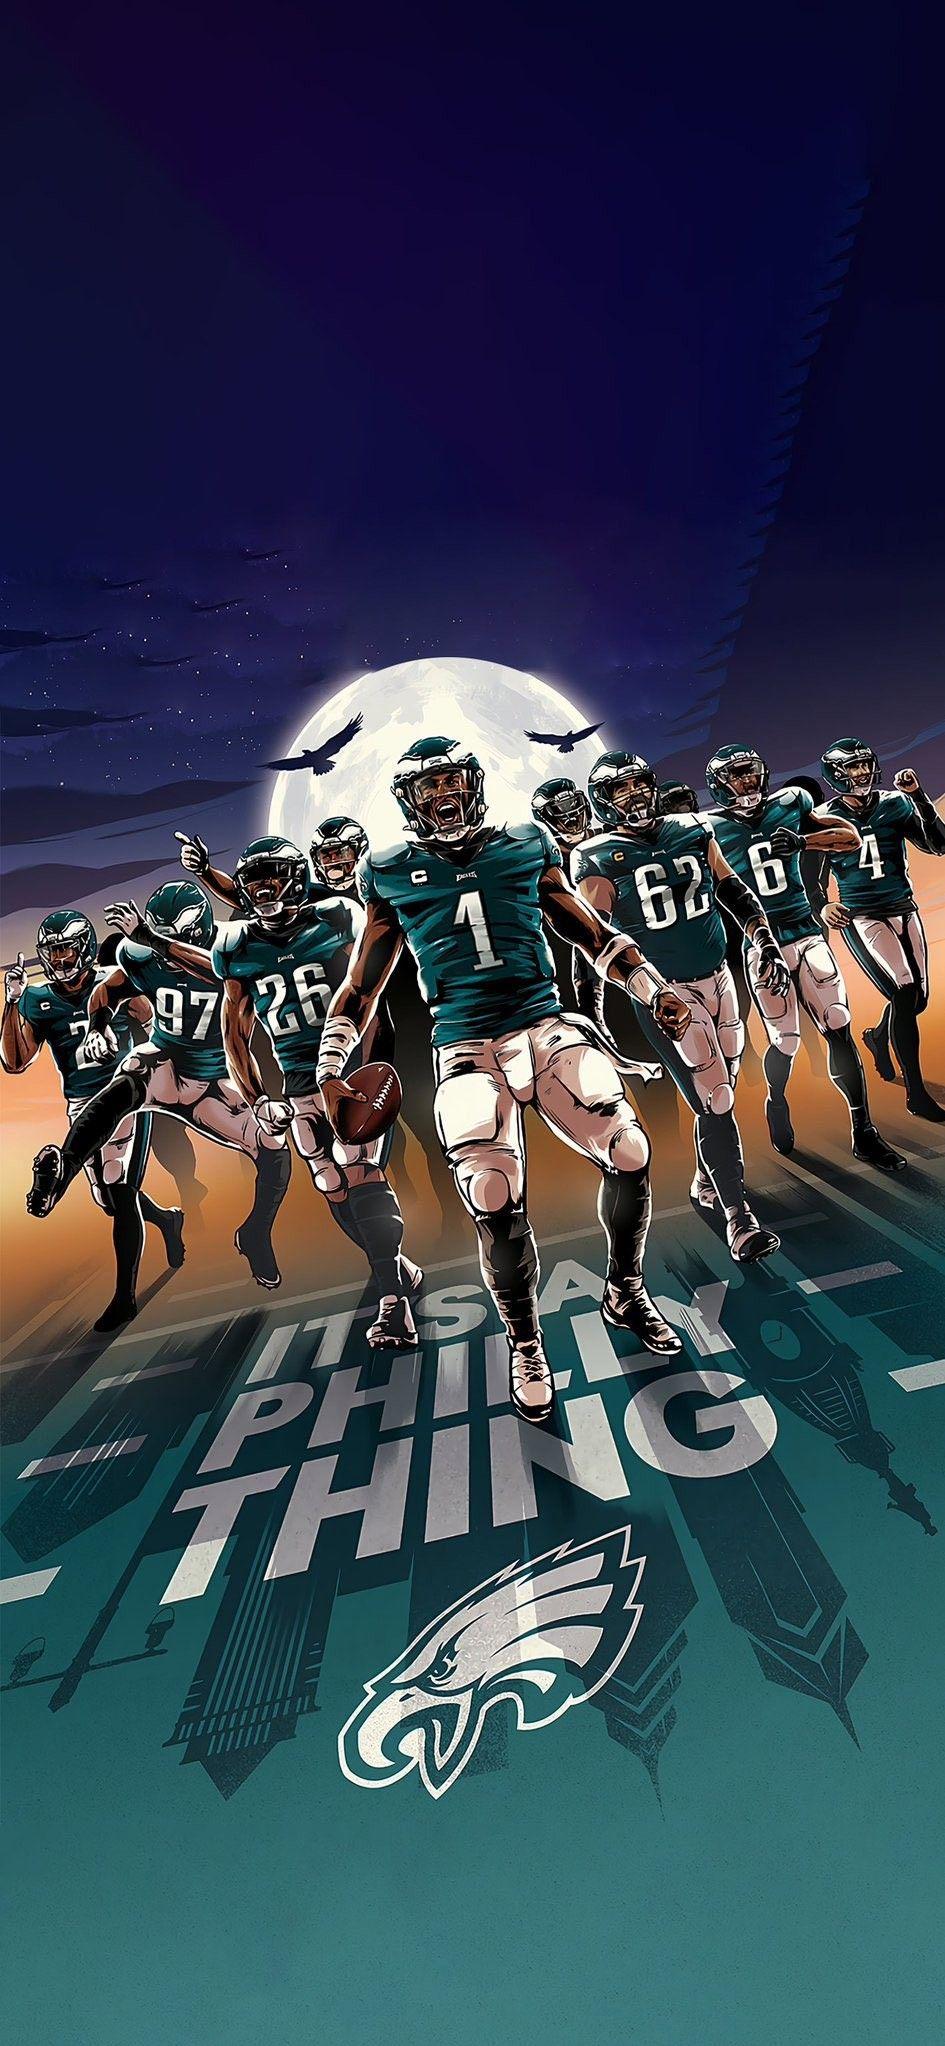 It S A Philly Thing In Philadelphia Eagles Wallpaper Nfl